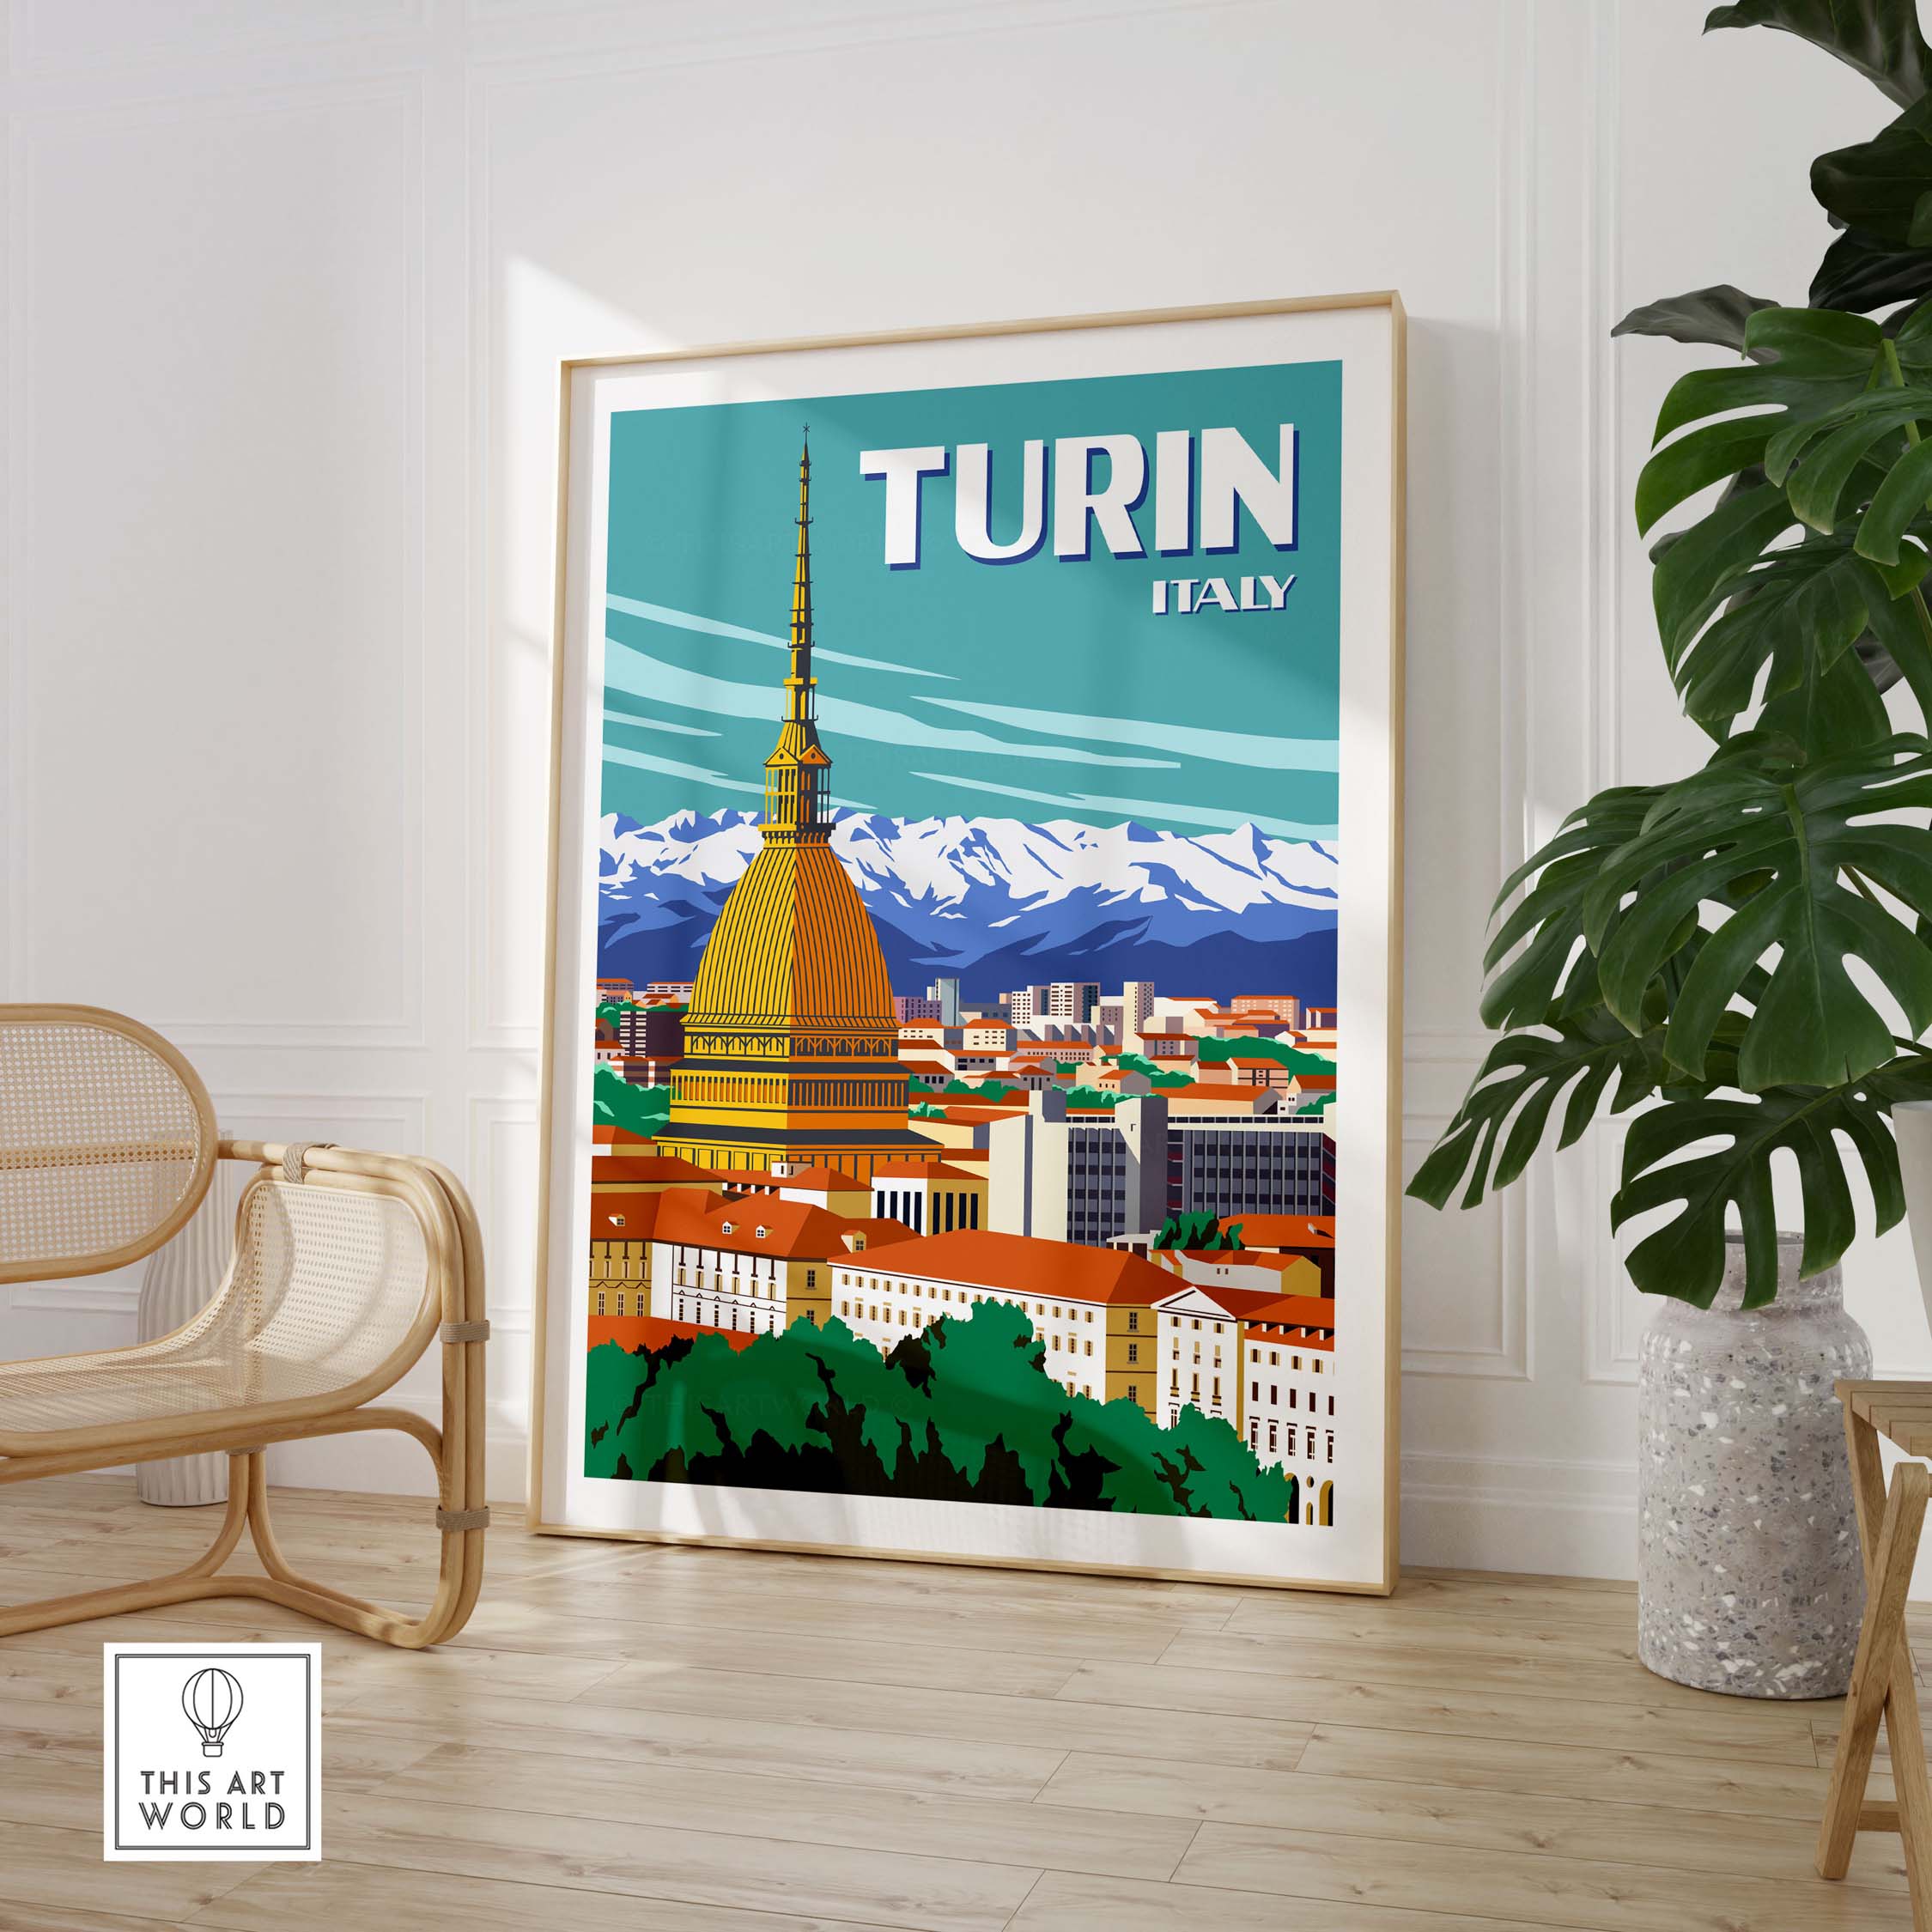 Turin Italy Travel Poster Print | This Art World